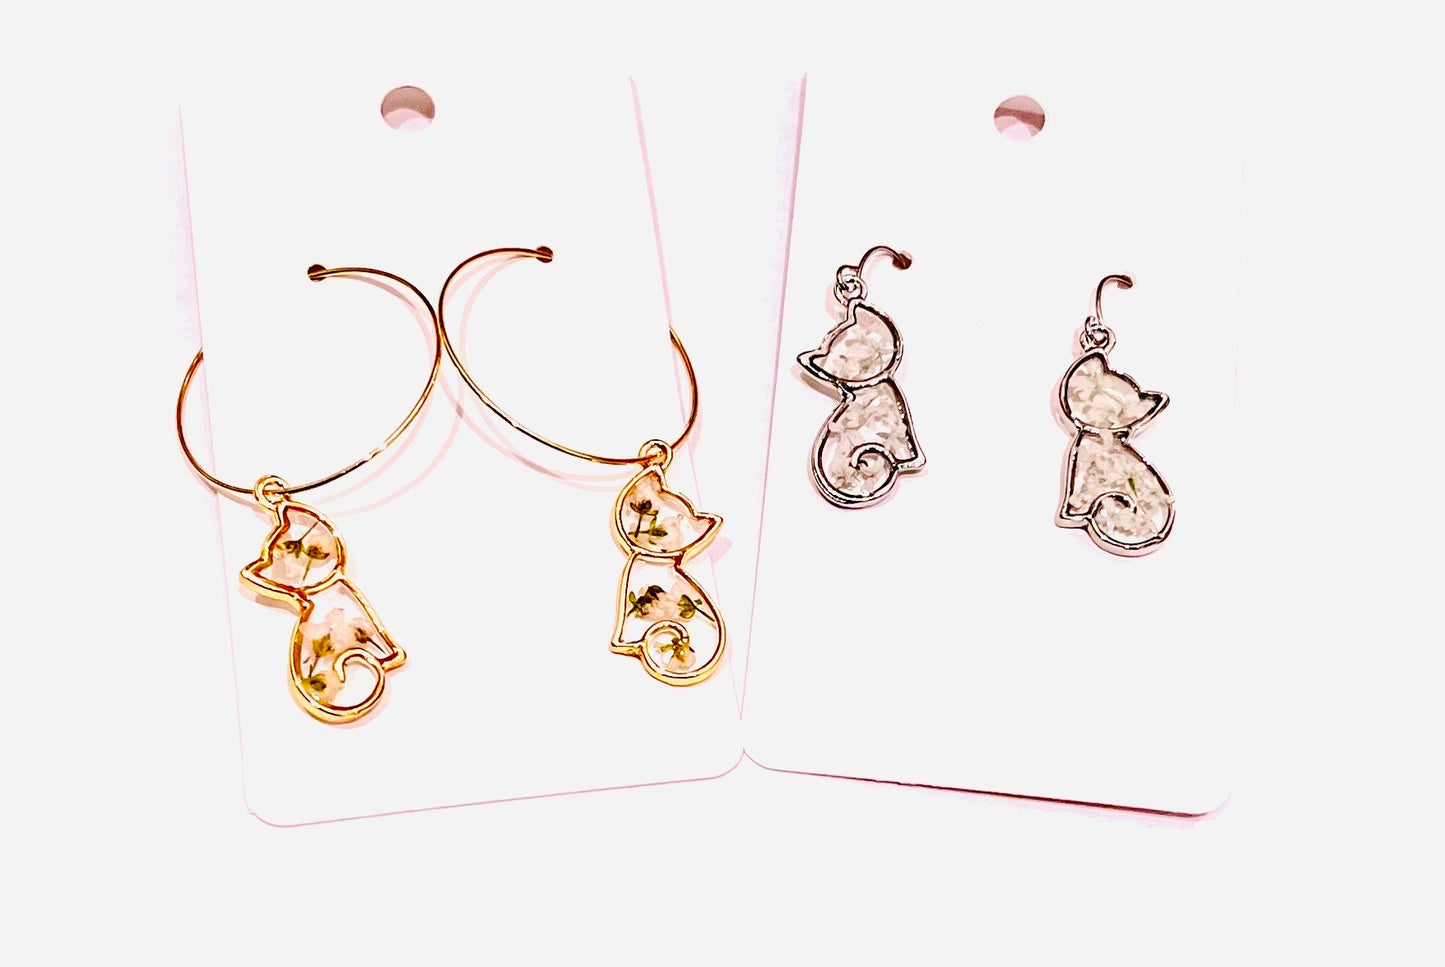 White Cat Earrings. White Queen Anne’s lace flowers. 18K gold plated earrings. Special Gift for Cat Lovers.